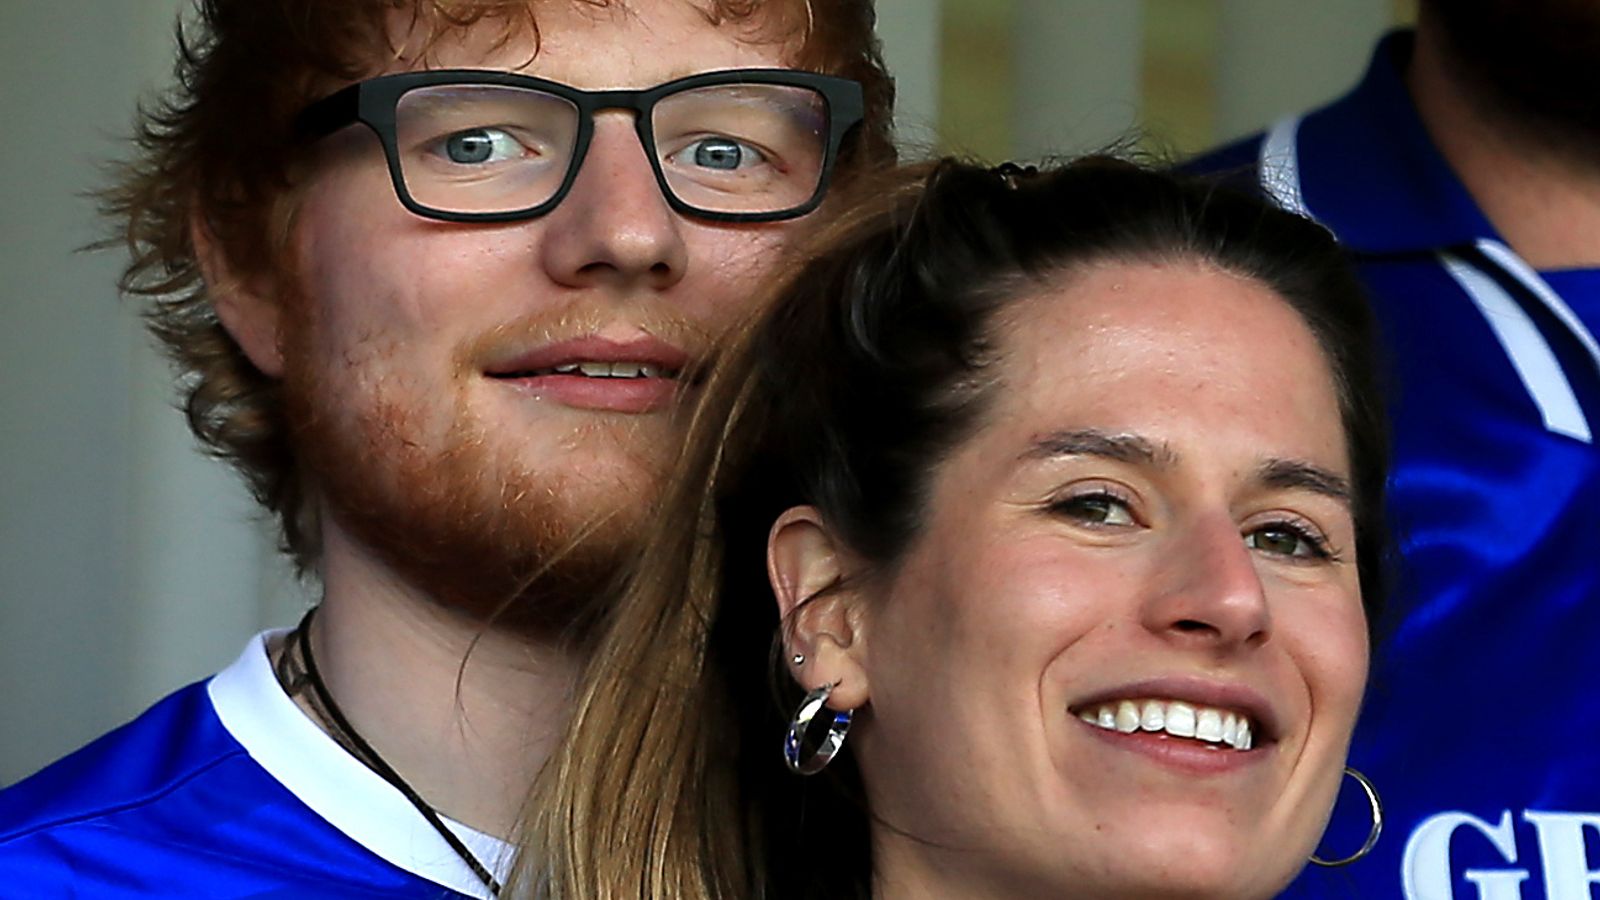 Ed Sheeran: Singer says he is "over the moon" at birth of second baby girl